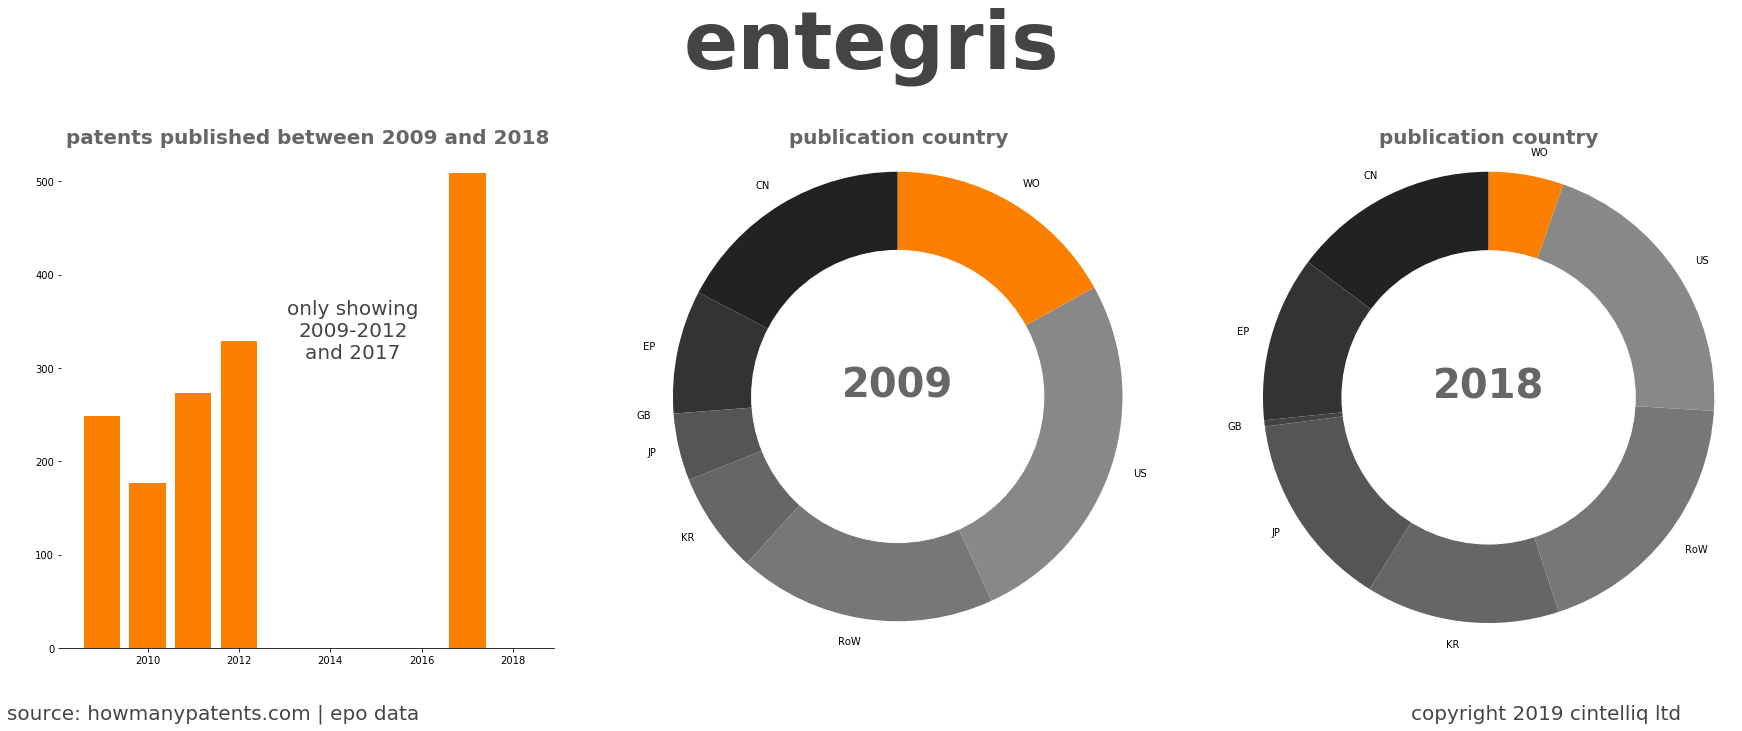 summary of patents for Entegris